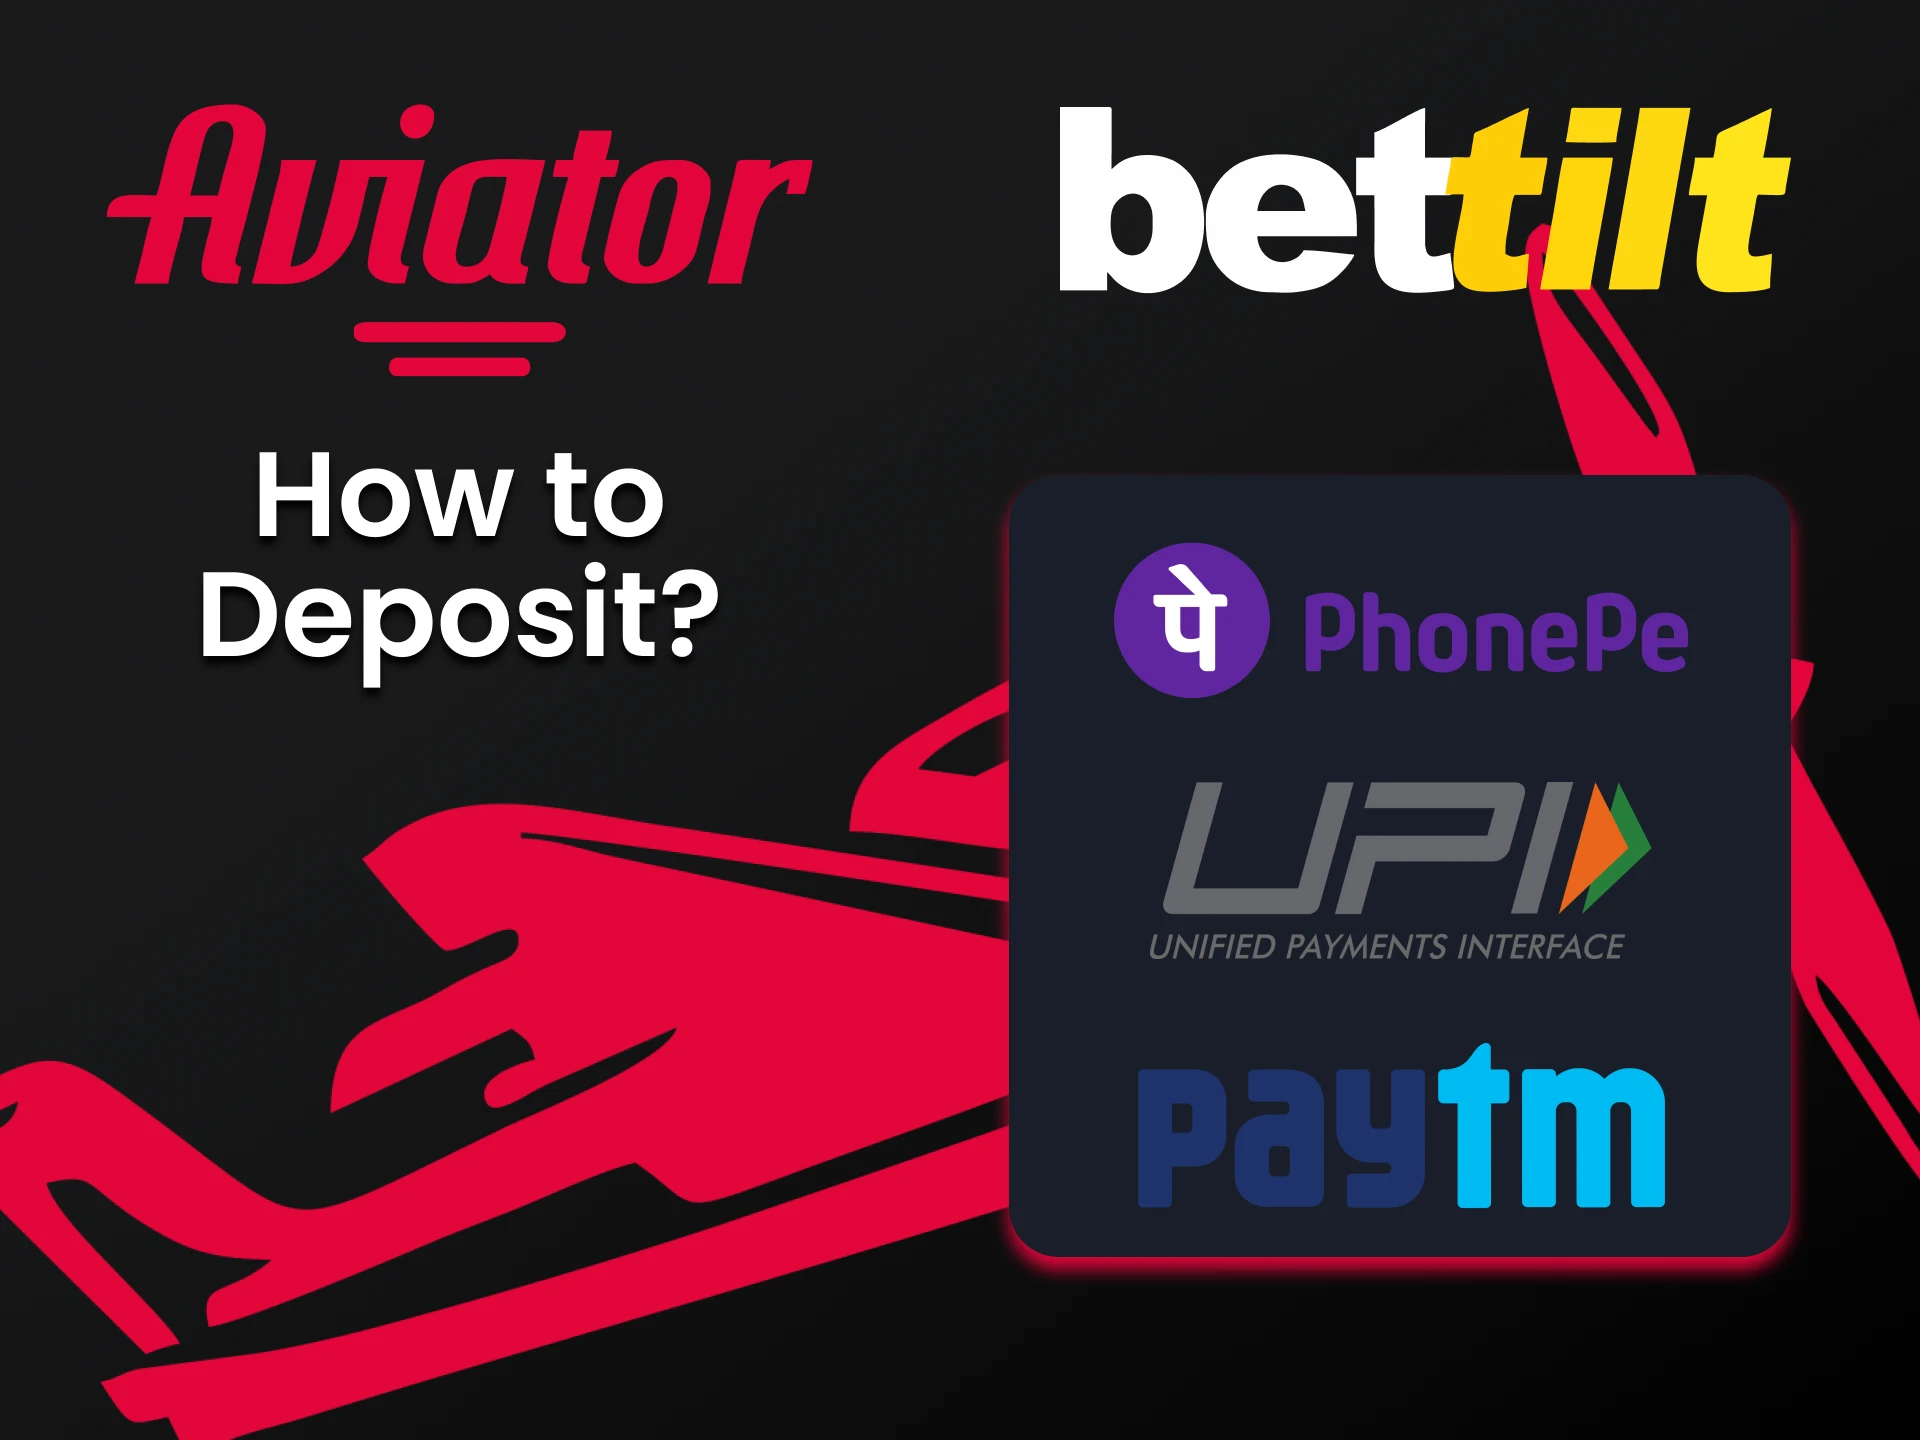 Find out how to top up your Aviator account from Bettilt.